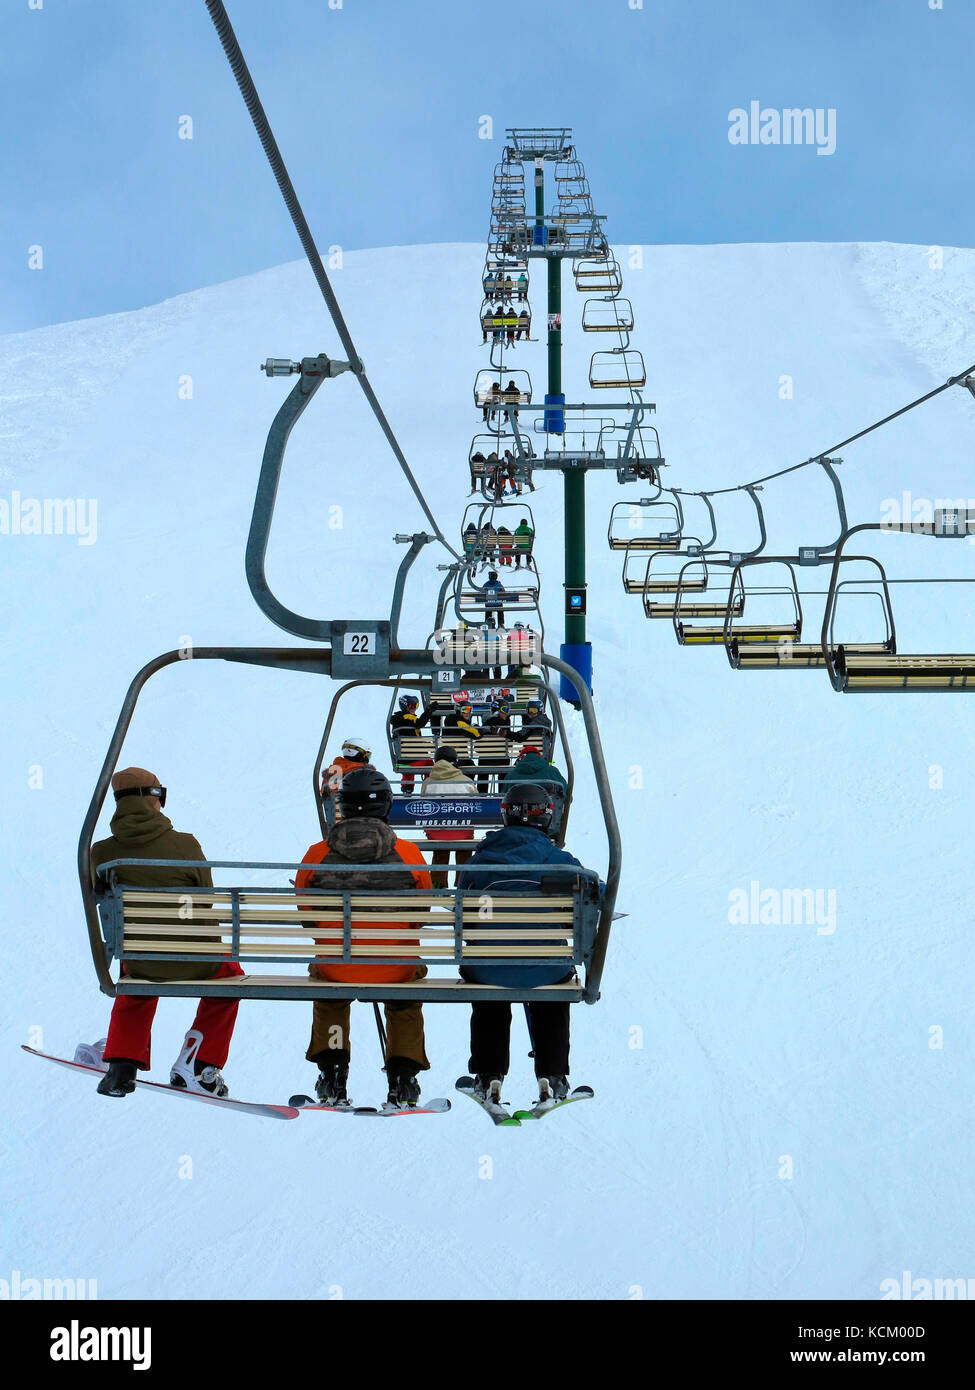 Heavenly Valley chairlift on Mount Hotham, capable ot taking 2400 skiers every hour. Victorian Alps, Victoria, Australia Stock Photo